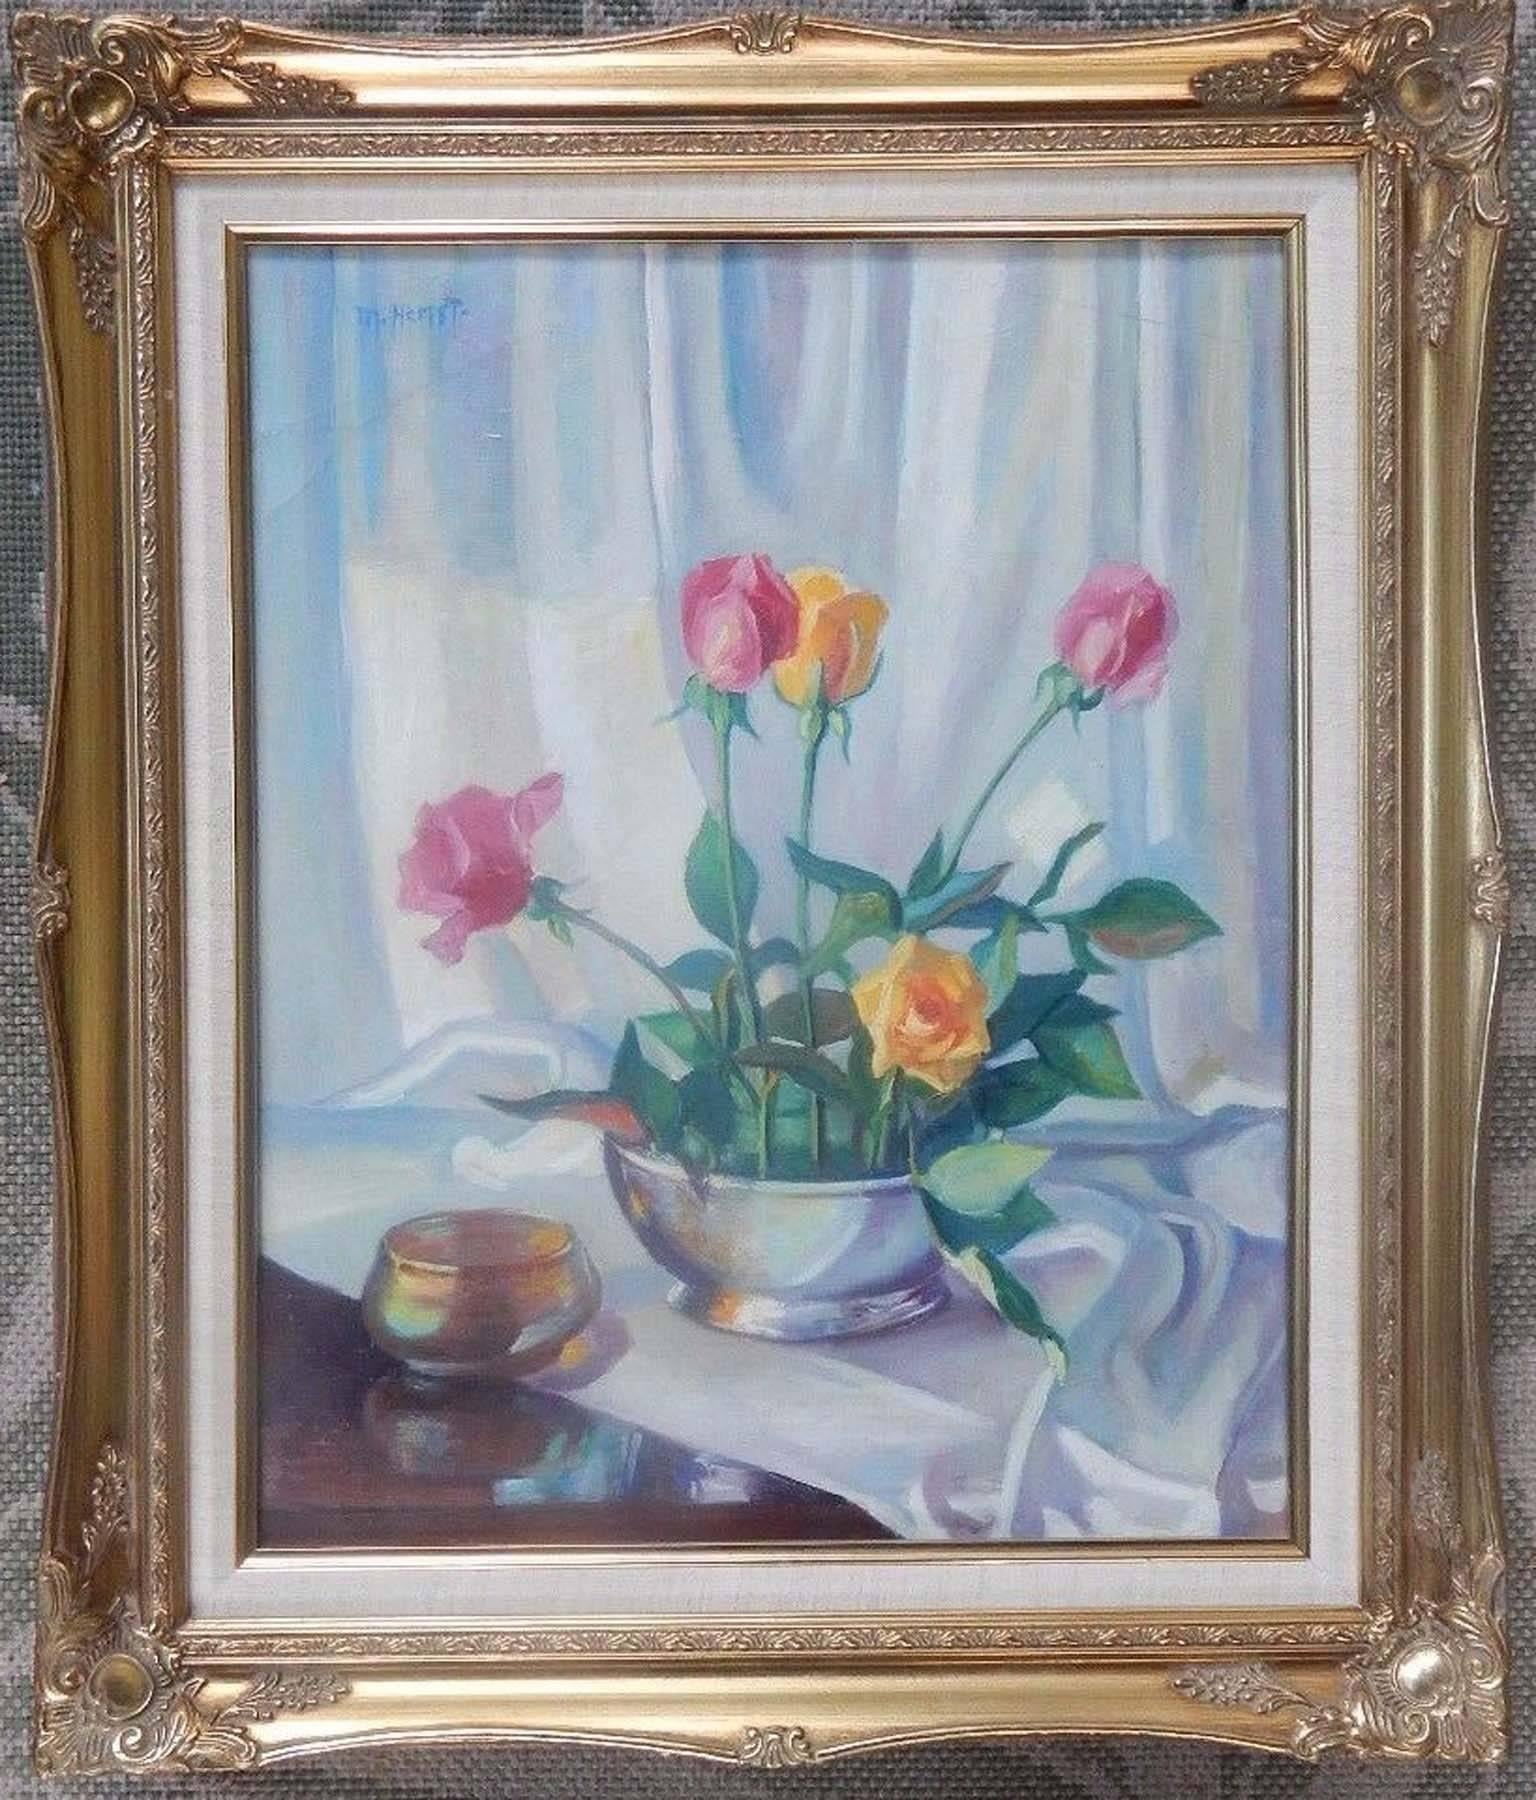 STILL LIFE WITH ROSES - Painting by MARTHA HERPST